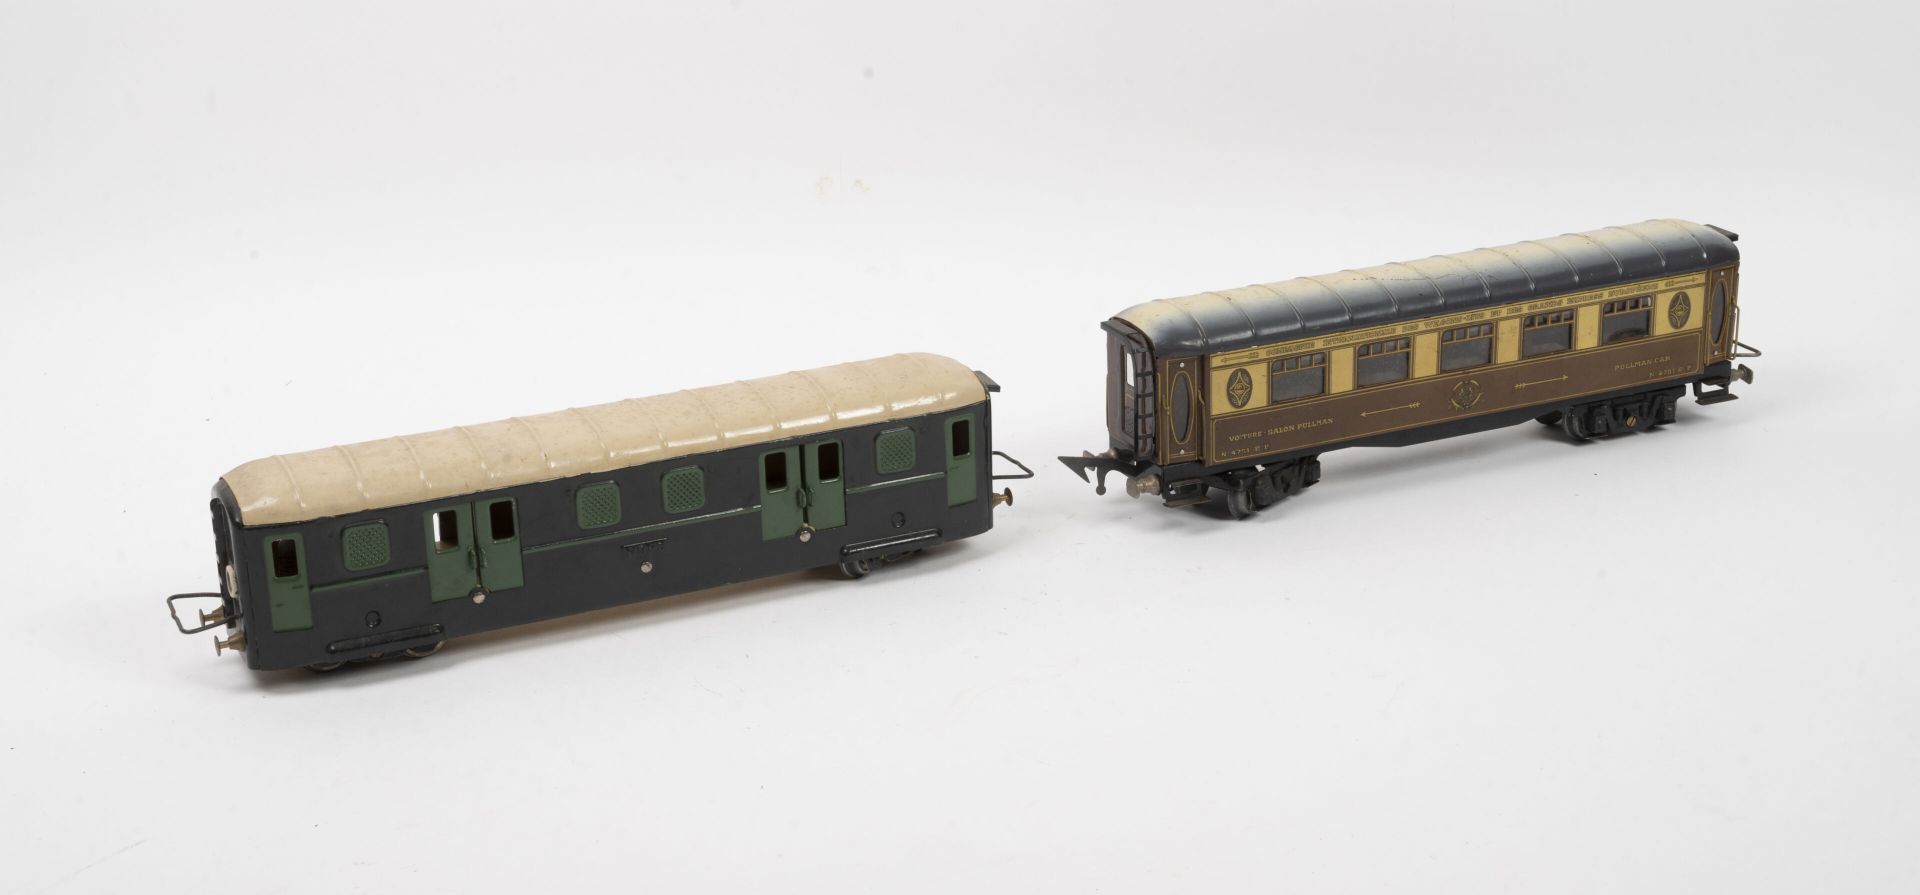 JEP Lot of two cars or coaches.

A Pullman and a North traveler.

In lithographe&hellip;